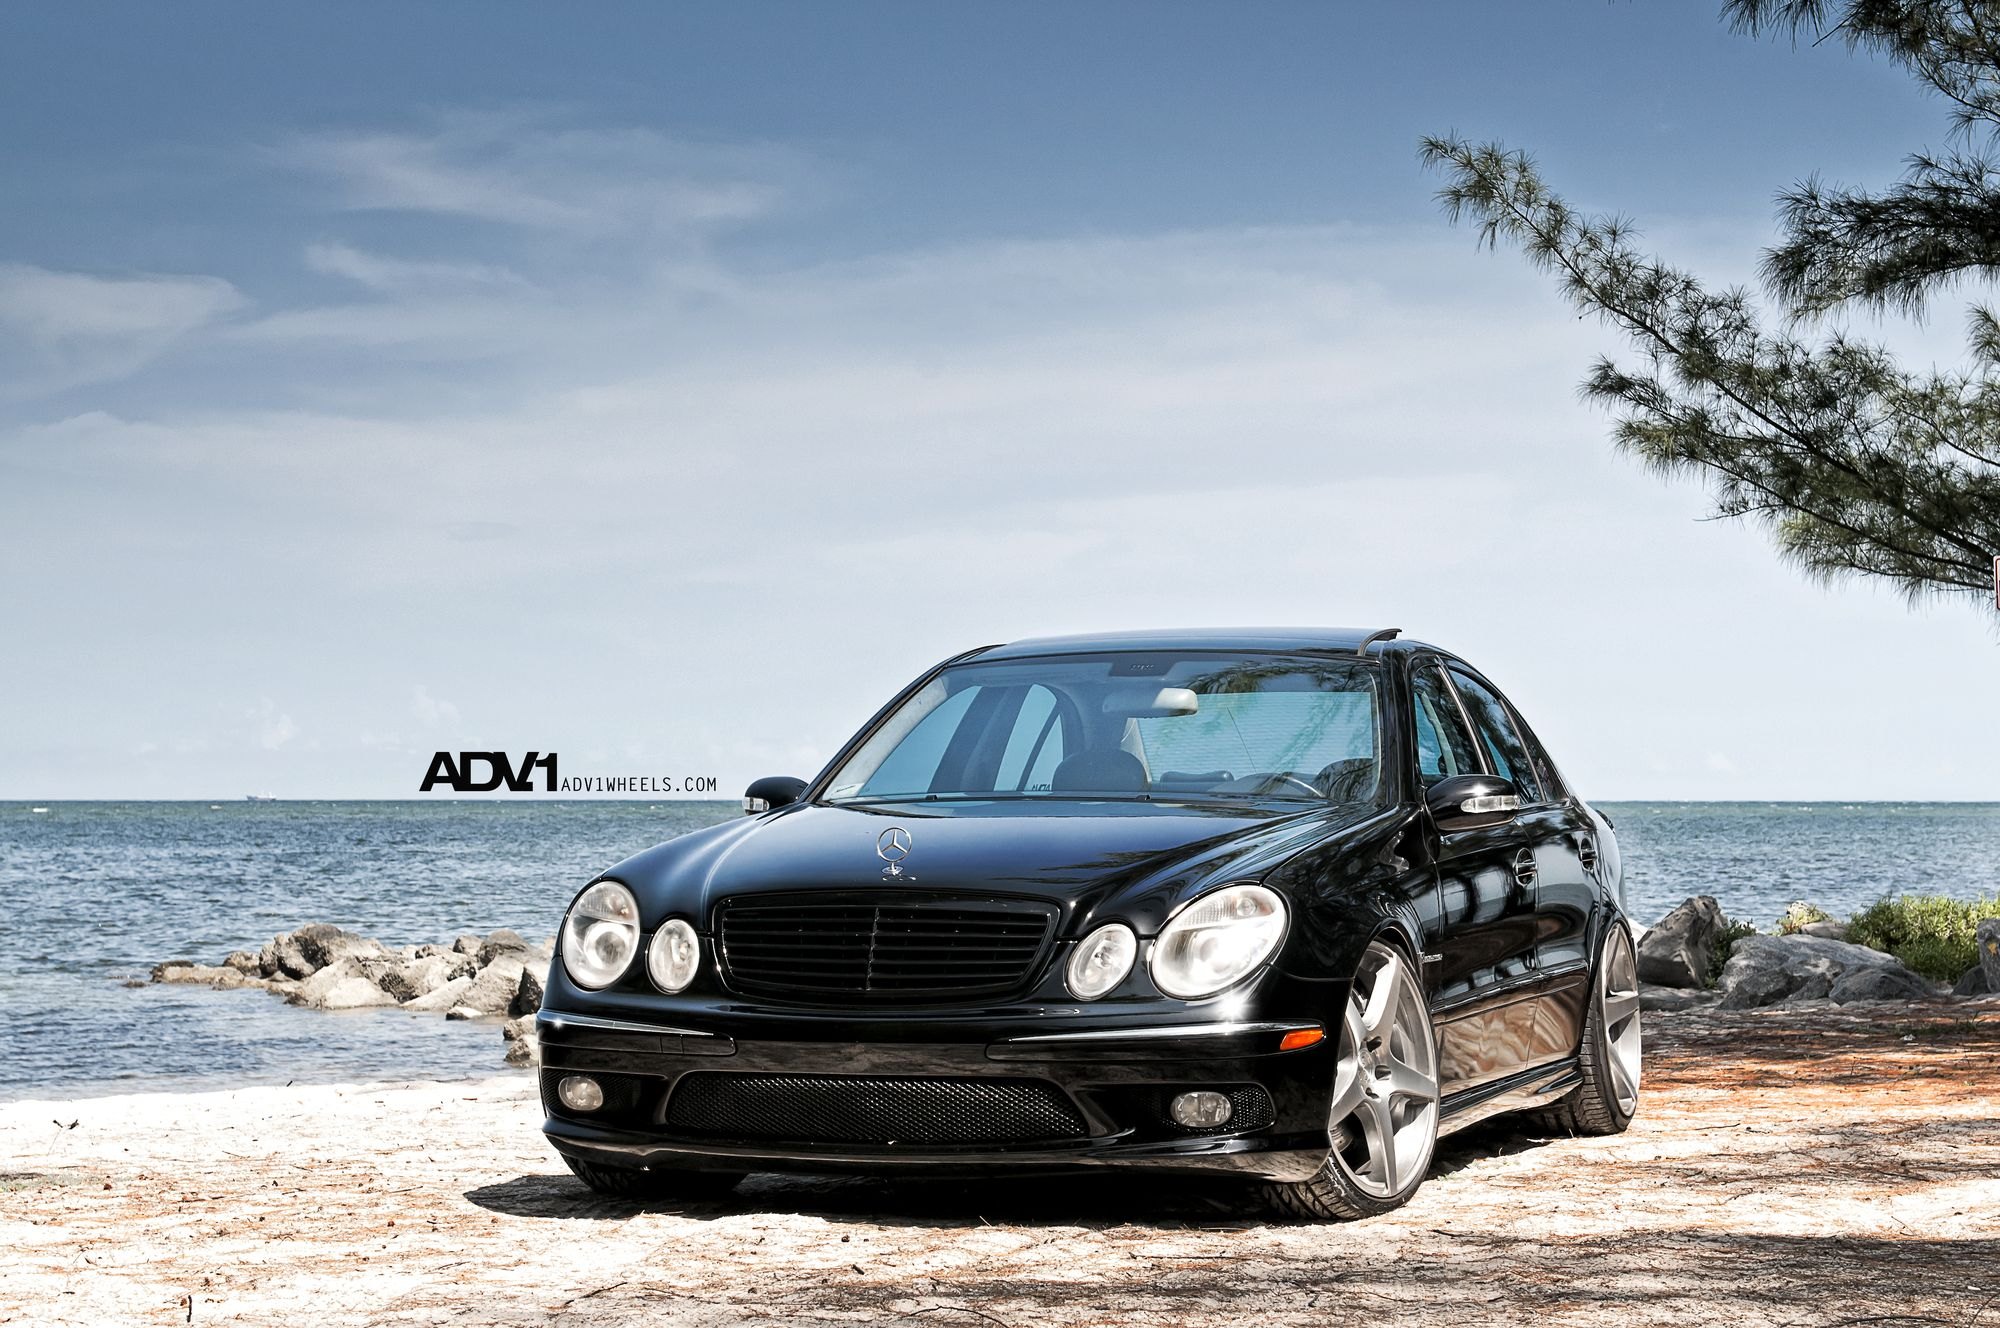 Lowered Mercedes E55 AMG on Classy Rims - Photo by ADV.1